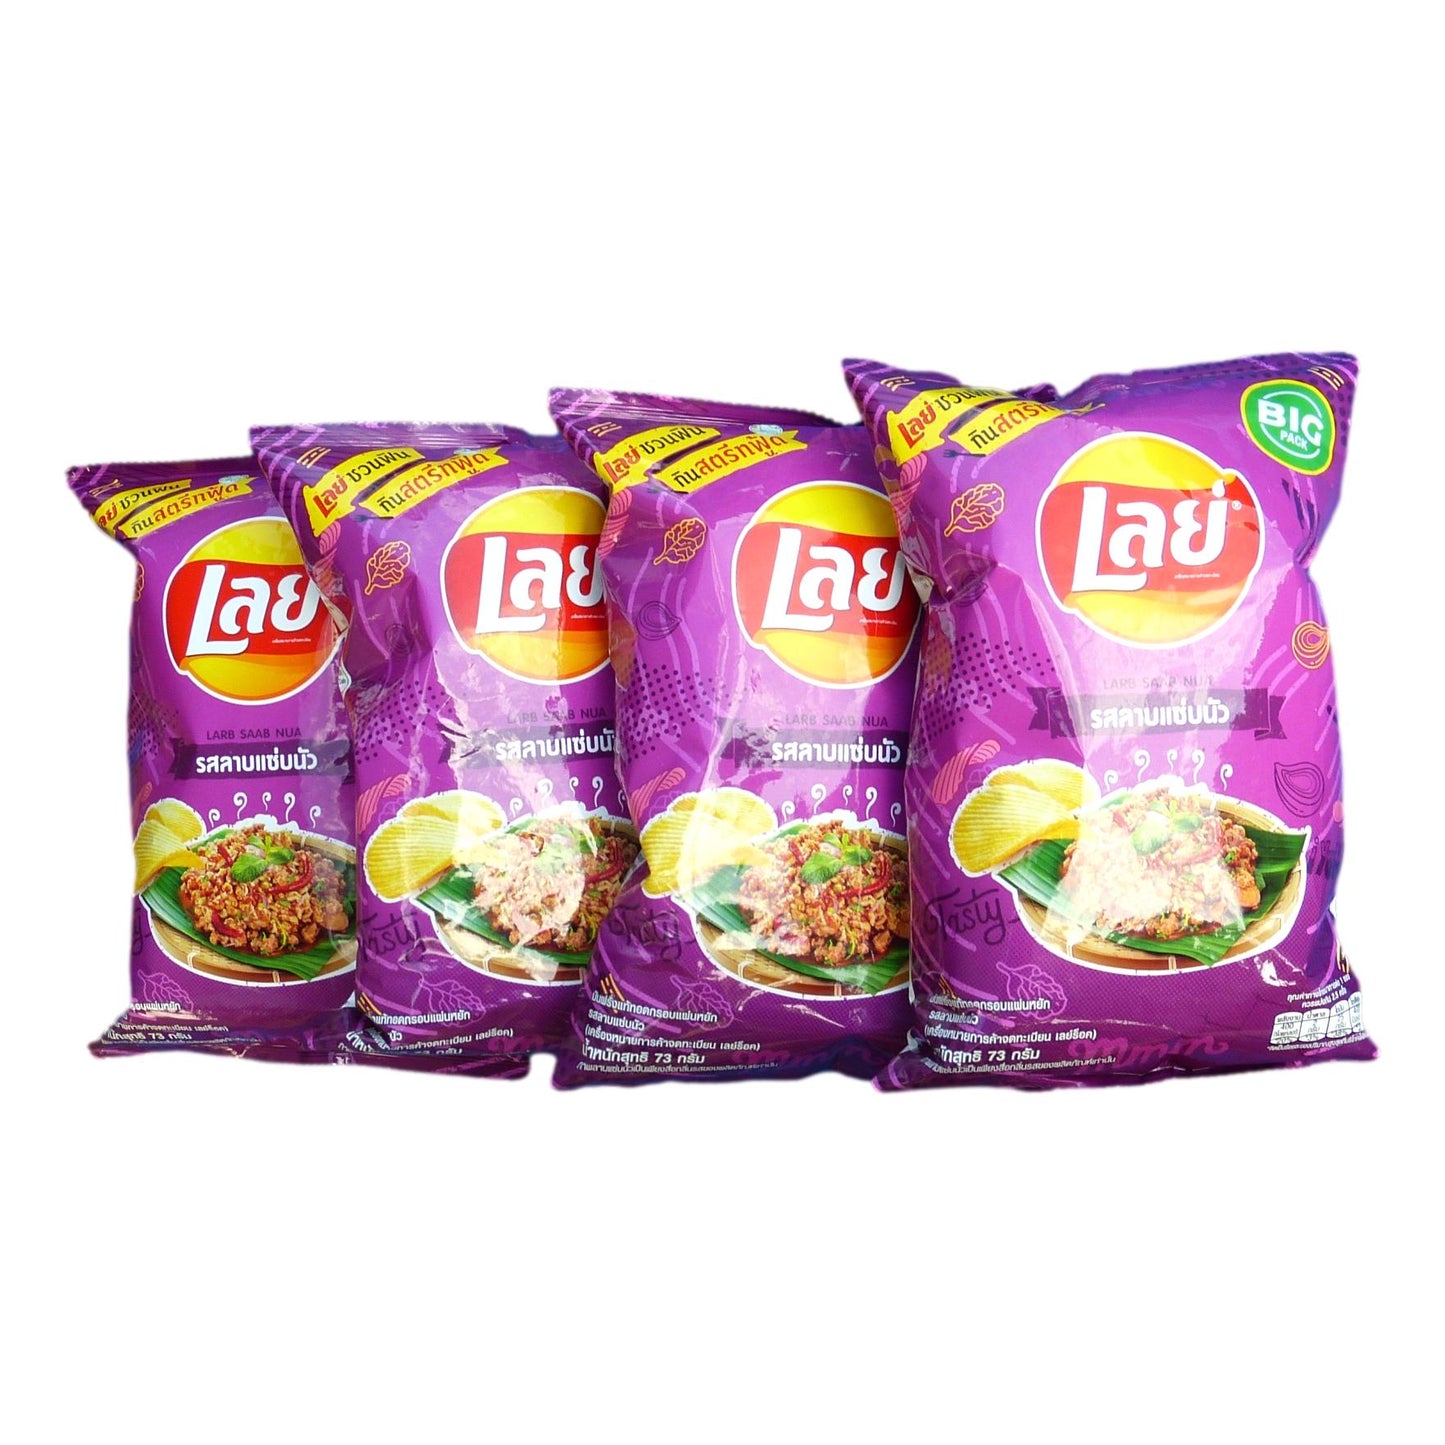 Lay's Brand Larb Saab Nua Thai Potato Chips 73g (Pack of 4) - Asian Beauty Supply